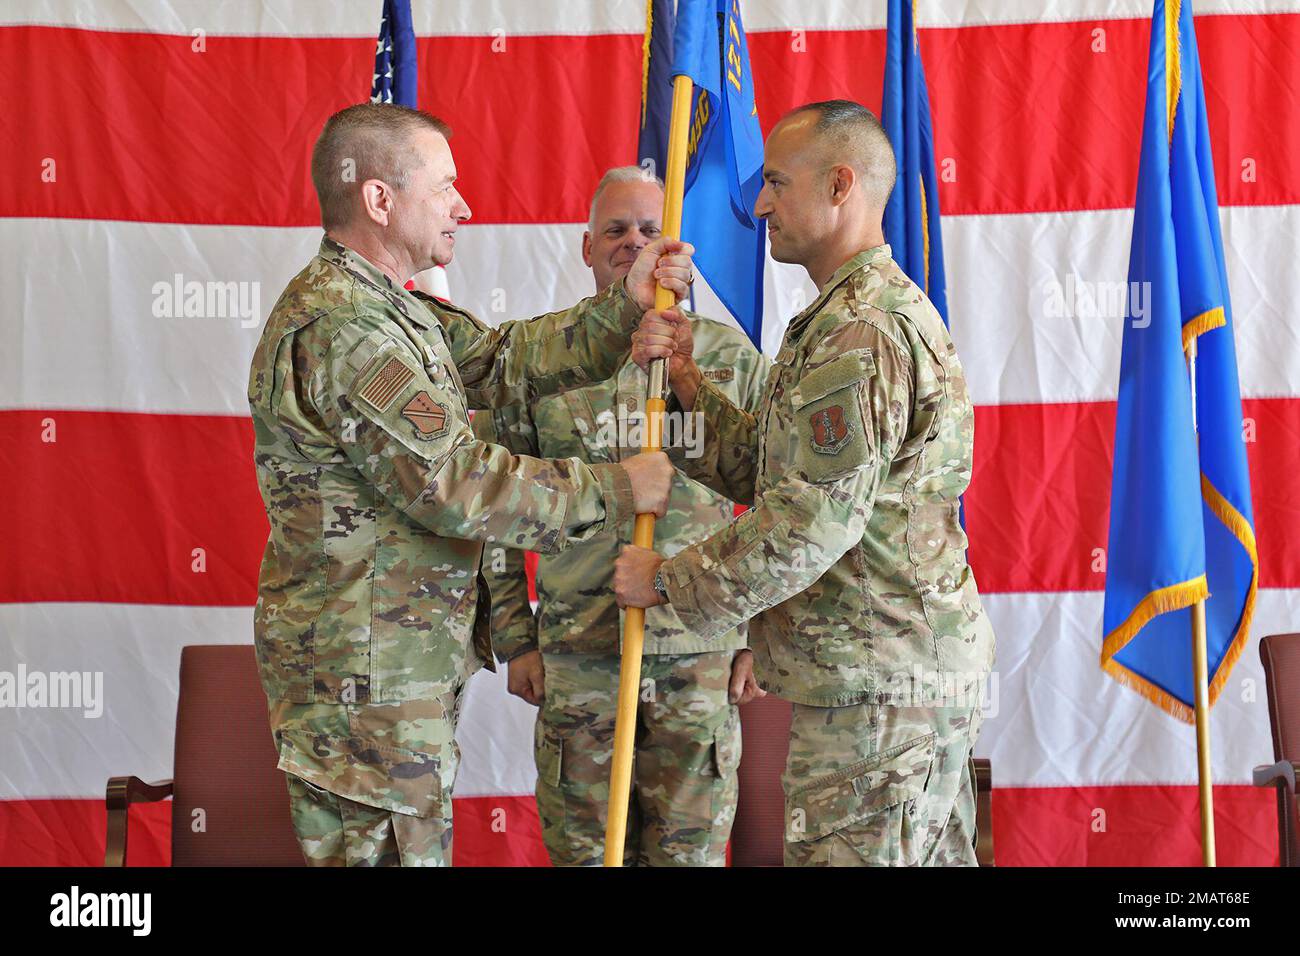 Brig. Gen. Rolf Mammen, commander of the 127th Wing, hands the guidon off to Lt. Col. Sam Trapasso during the 127th Mission Support Group Change of Command ceremony at Selfridge Air National Guard Base, June 4, 2022. Trapasso took command of the 127th Mission Group at the ceremony. Stock Photo